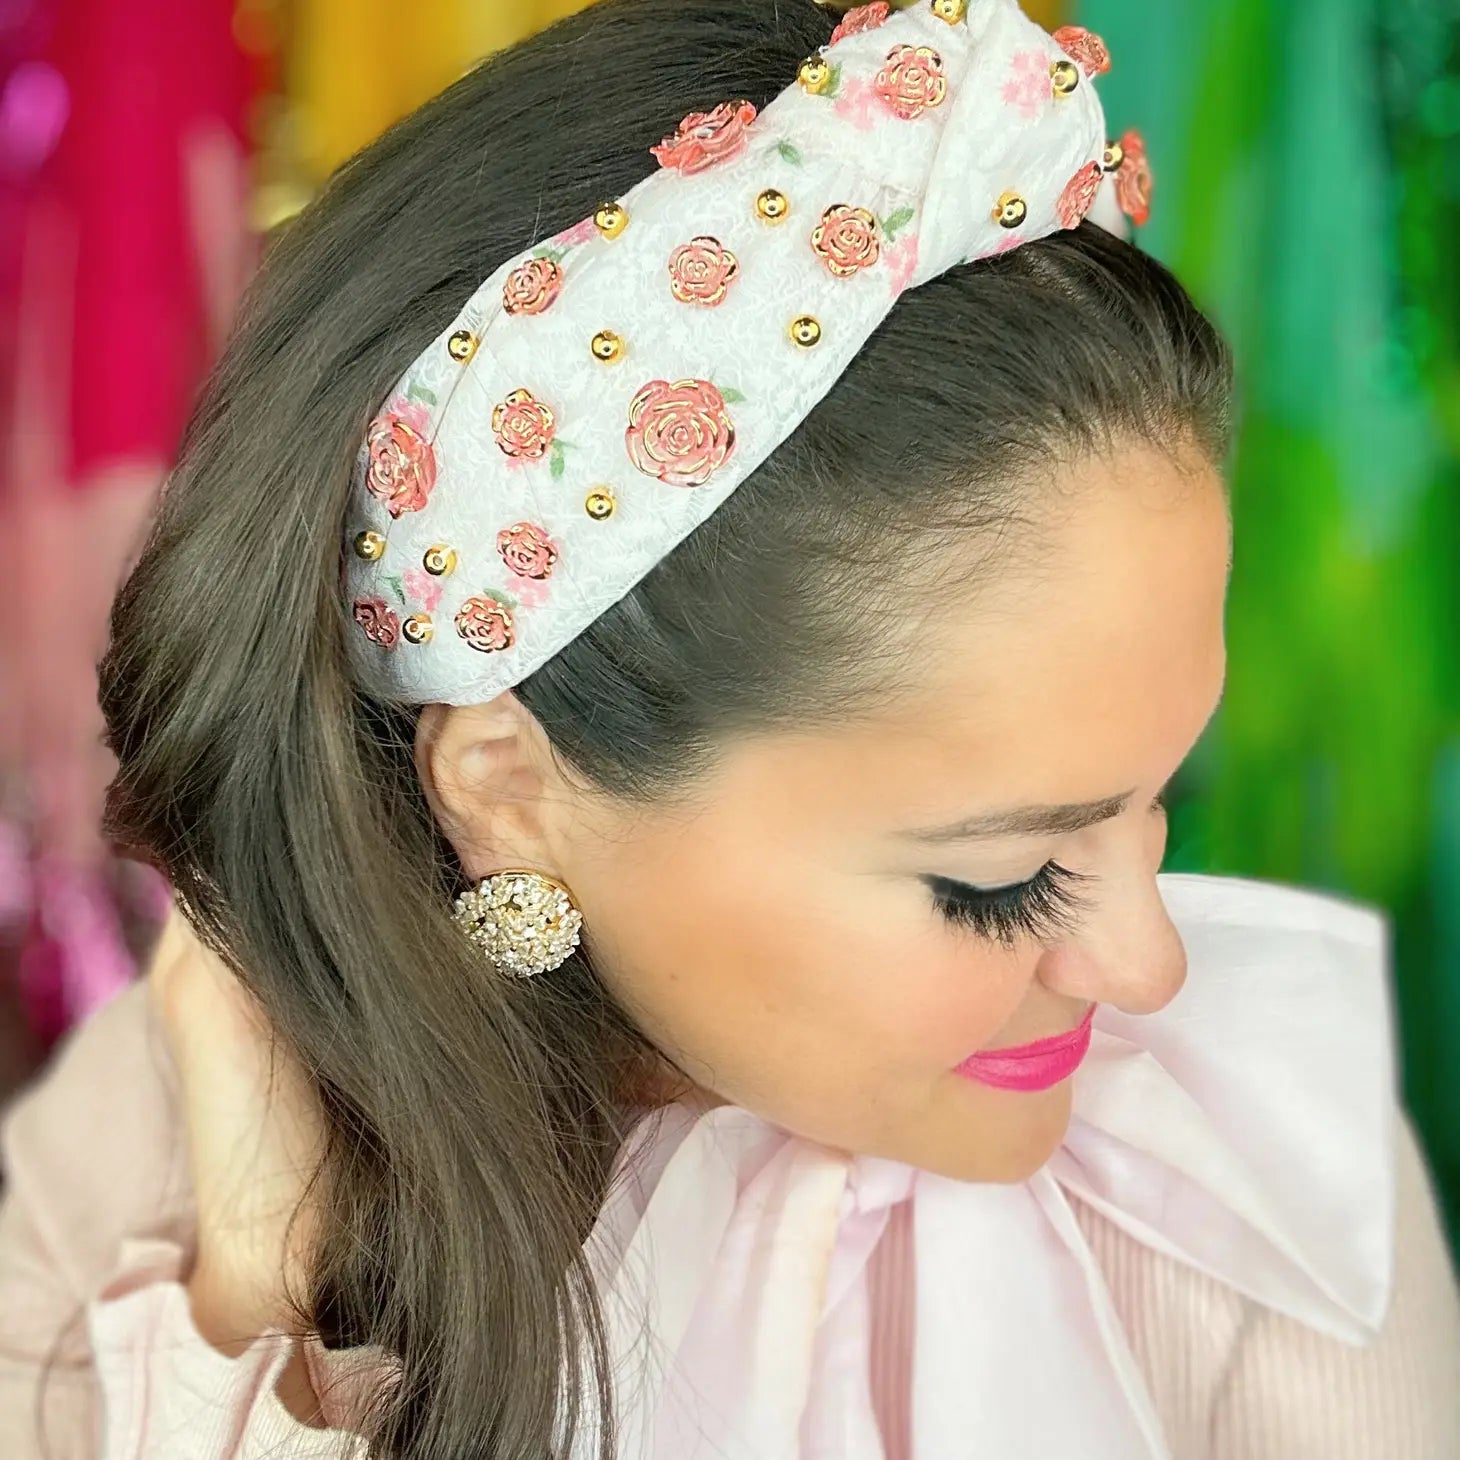 Rose Garden Headband with Gold Beads by Brianna Cannon